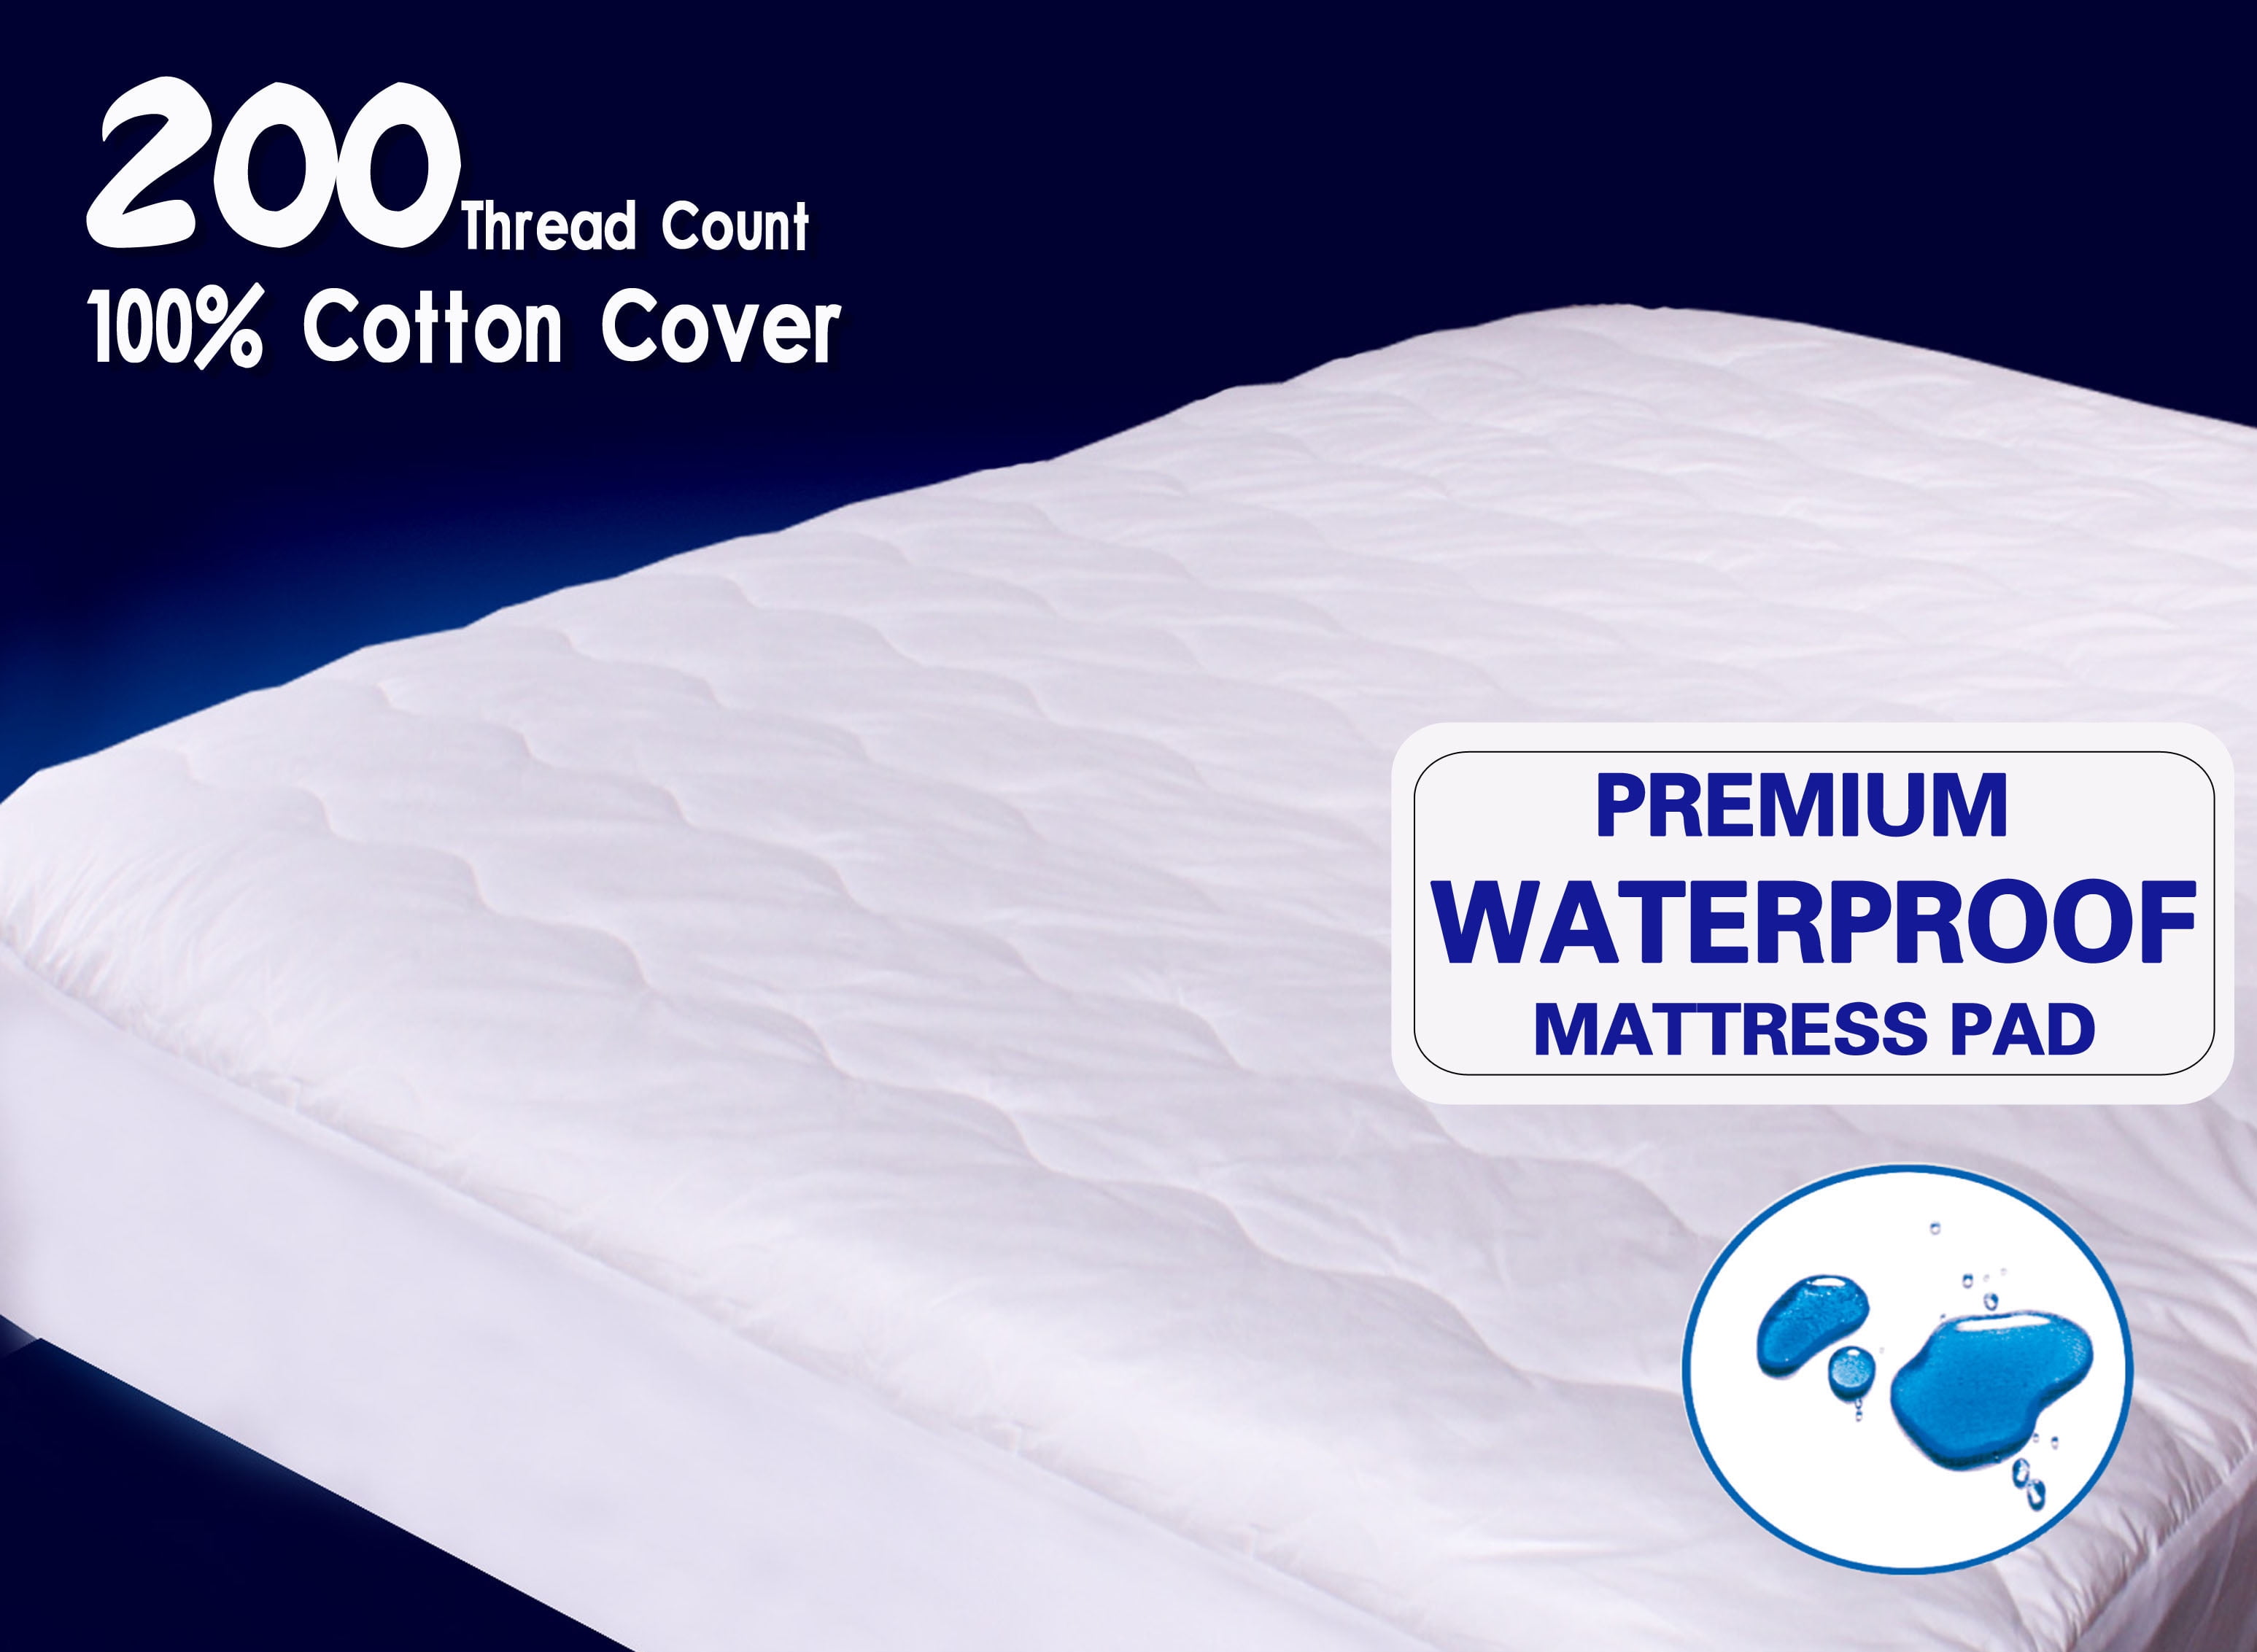 mattress cover for moving target